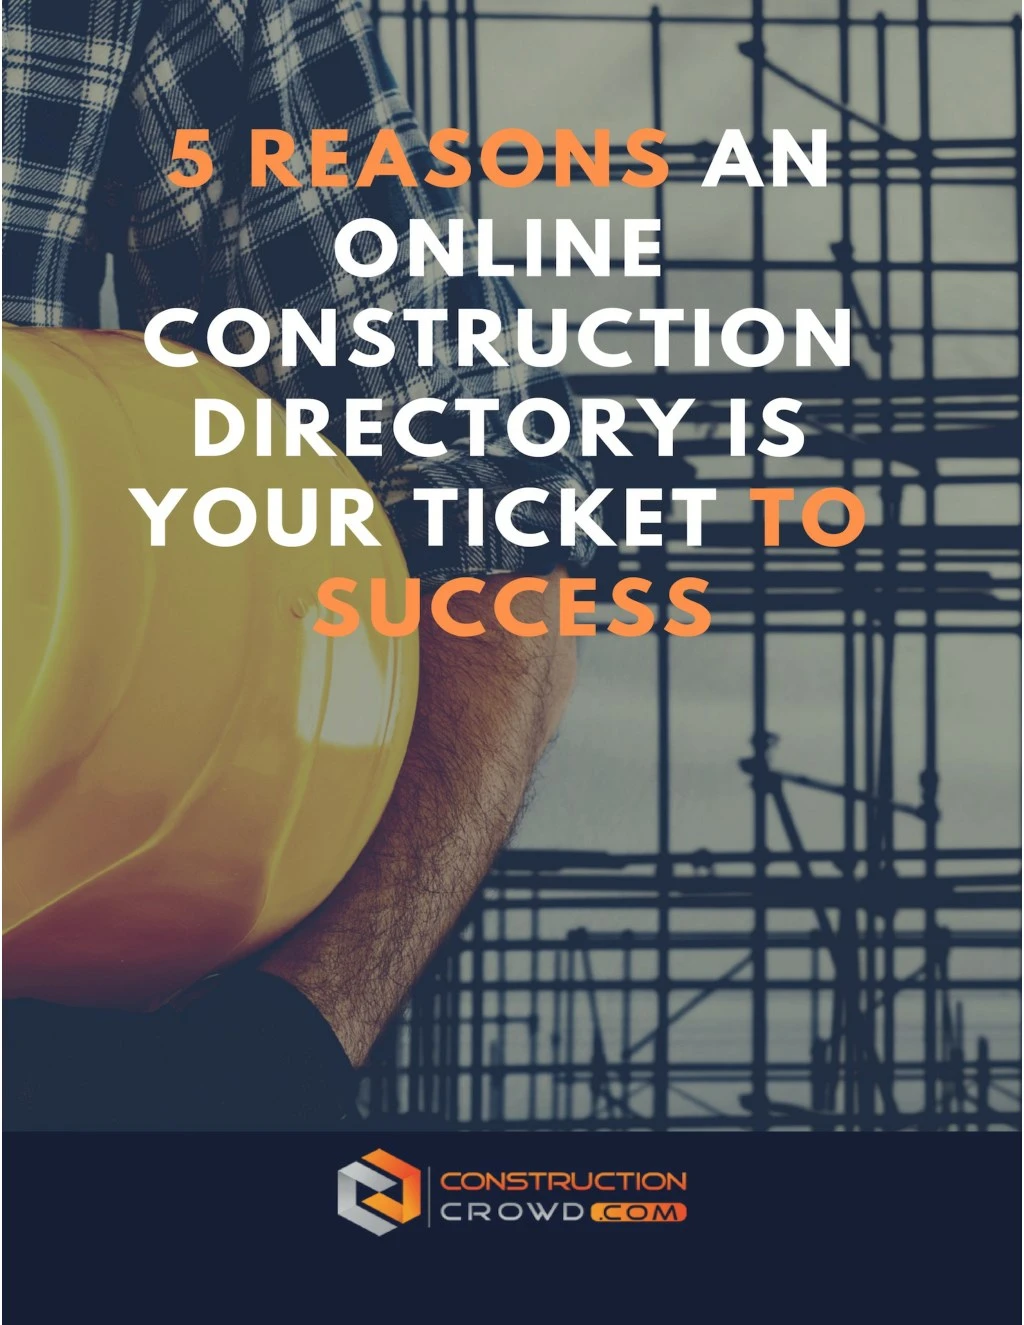 5 reasons an online constructon directory is your